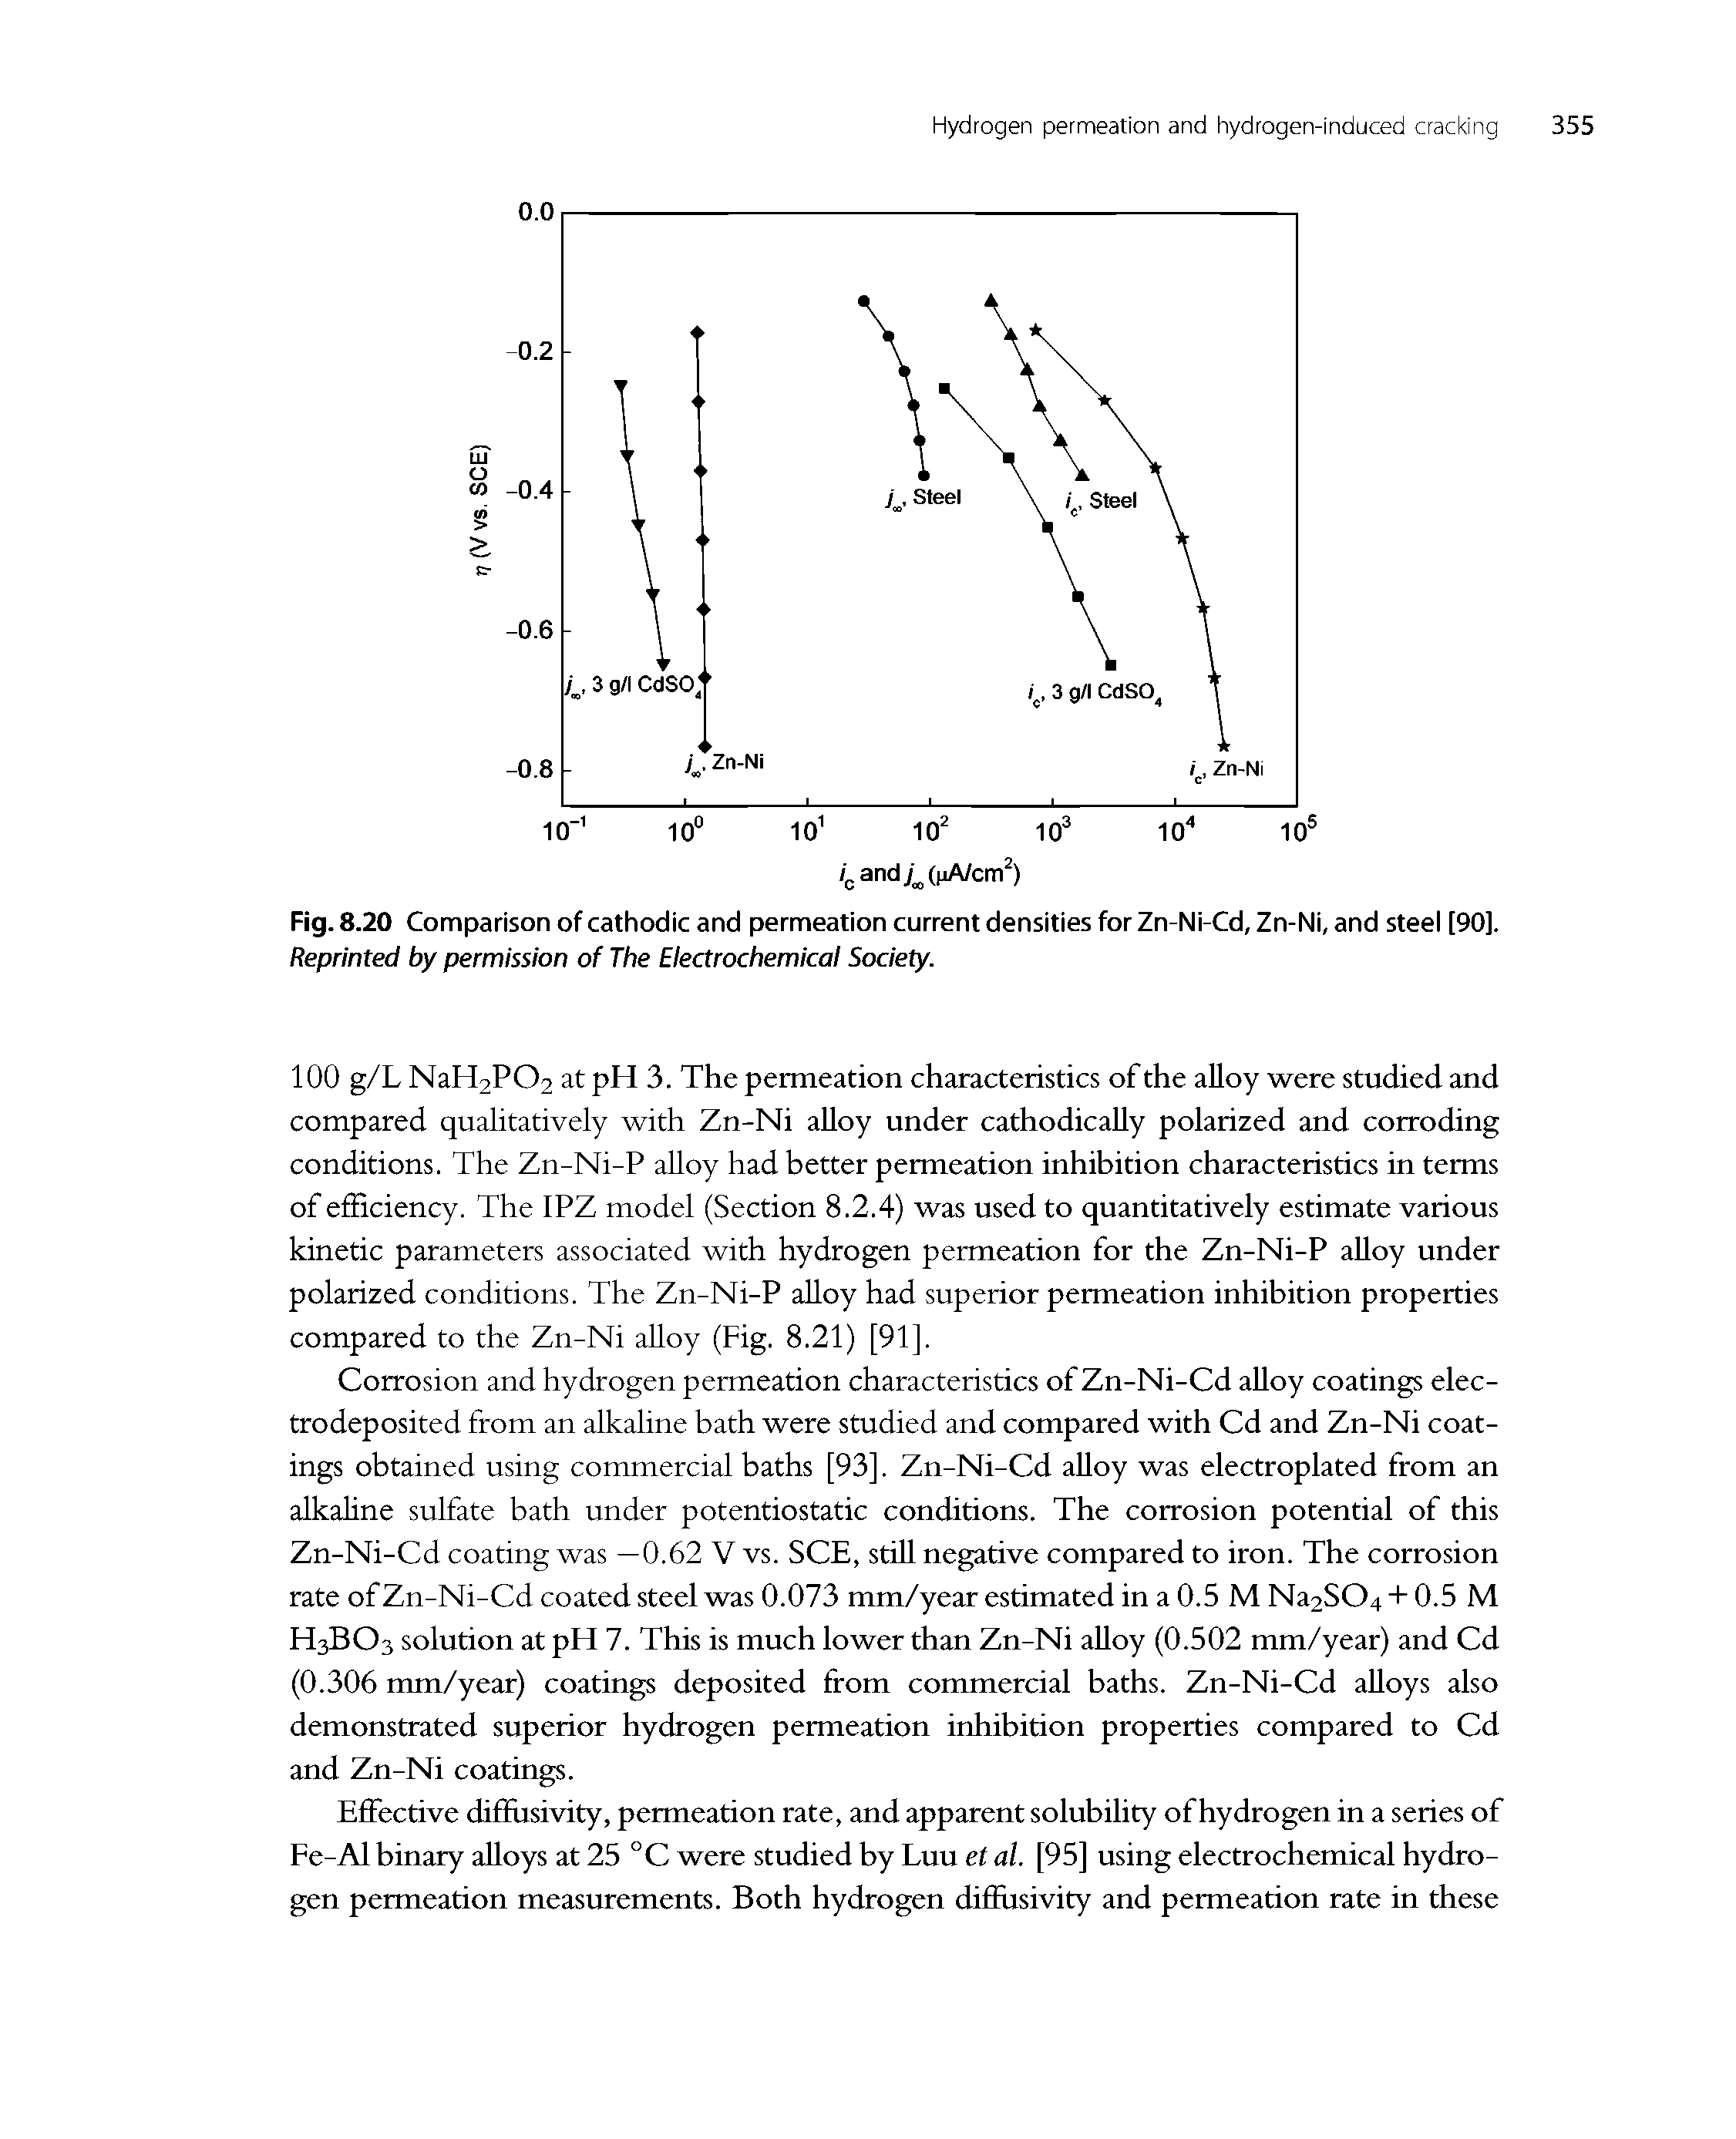 Fig. 8.20 Comparison of cathodic and permeation current densities for Zn-Ni-Cd, Zn-Ni, and steel [90]. Reprinted by permission of The Electrochemical Society.